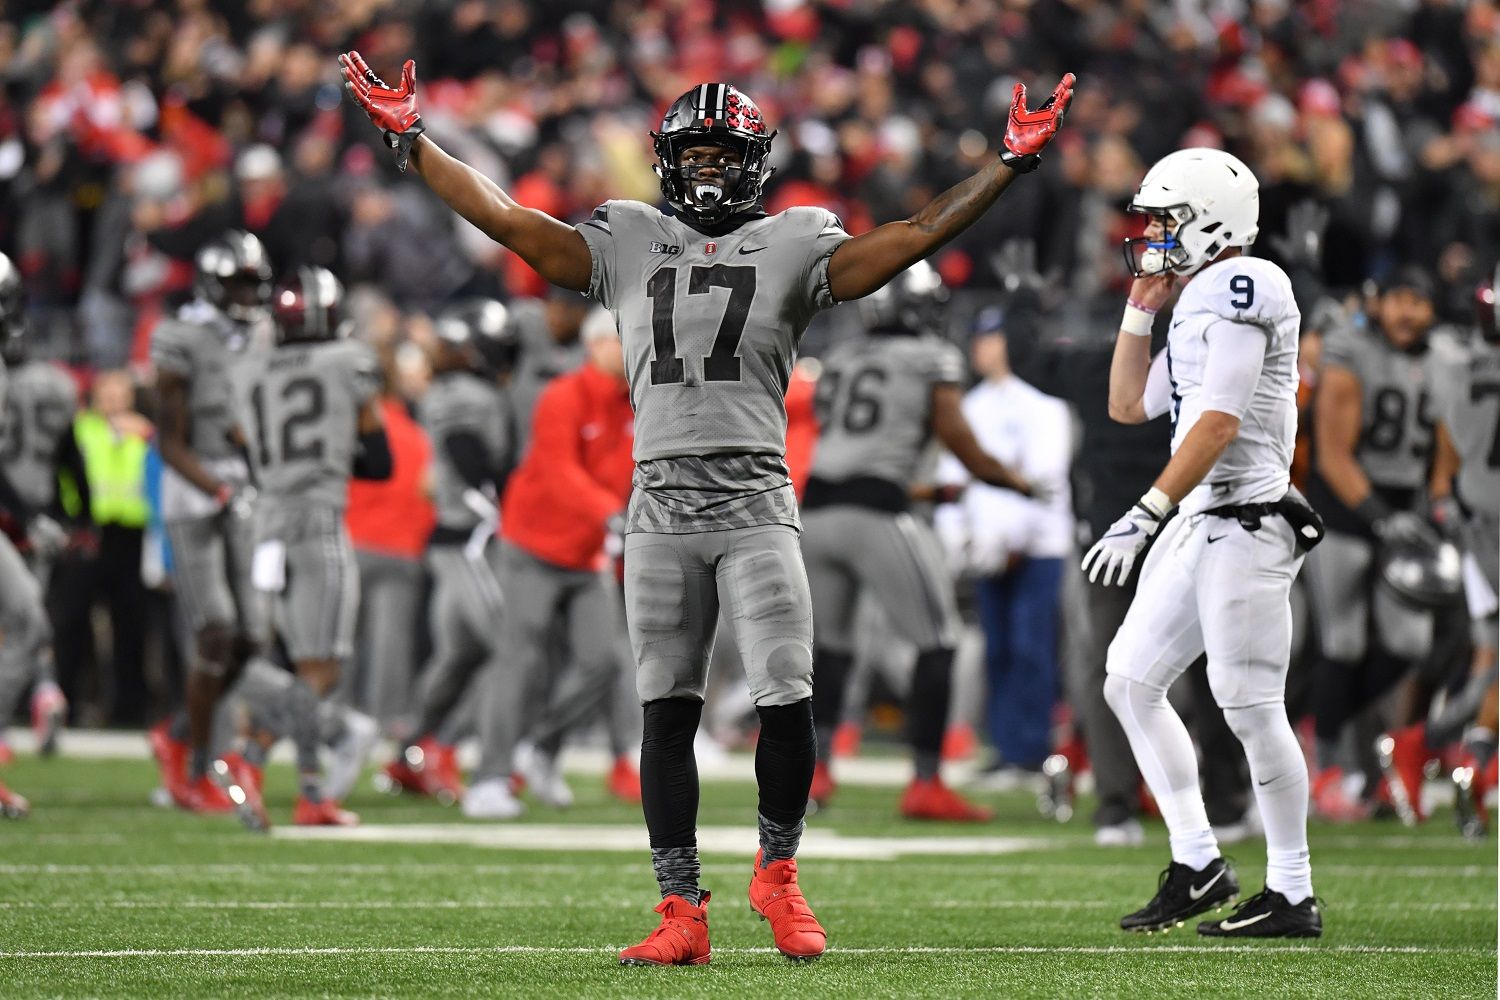 COLUMBUS, OH - OCTOBER 28:  Jerome Baker #17 of the Ohio State Buckeyes celebrates after stopping Penn State on downs in the fourth quarter as quarterback Trace McSorley #9 of the Penn State Nittany Lions walks off the field at Ohio Stadium on October 28, 2017 in Columbus, Ohio. Ohio State defeated Penn Statte 39-38.  (Photo by Jamie Sabau/Getty Images)